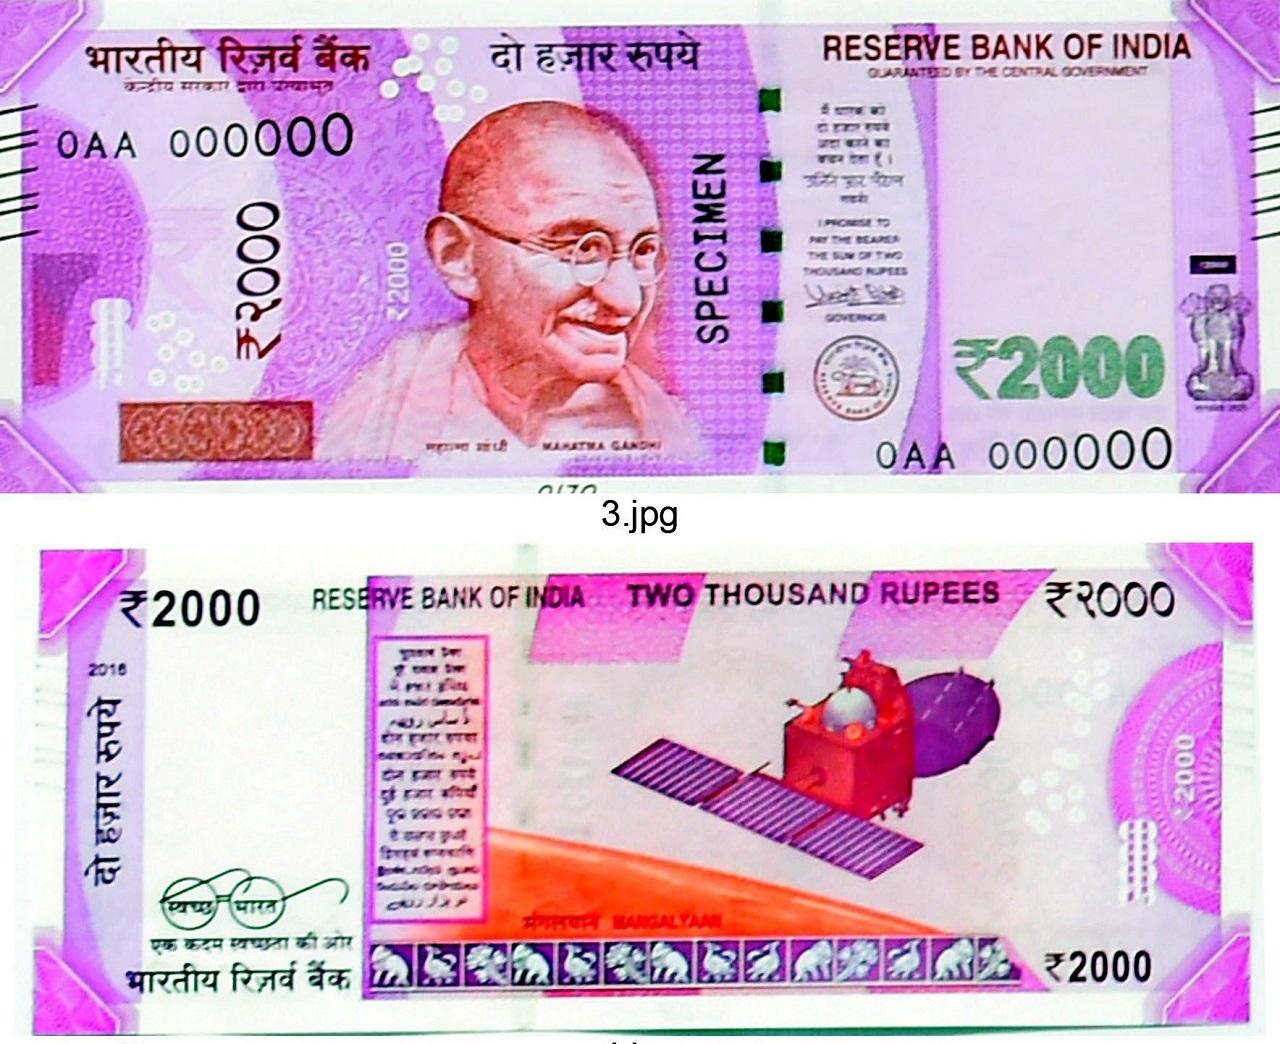 The Reserve Bank of India on Friday decided to withdraw the Rs 2000 denomination banknotes from circulation but said they would continue to remain as legal tender